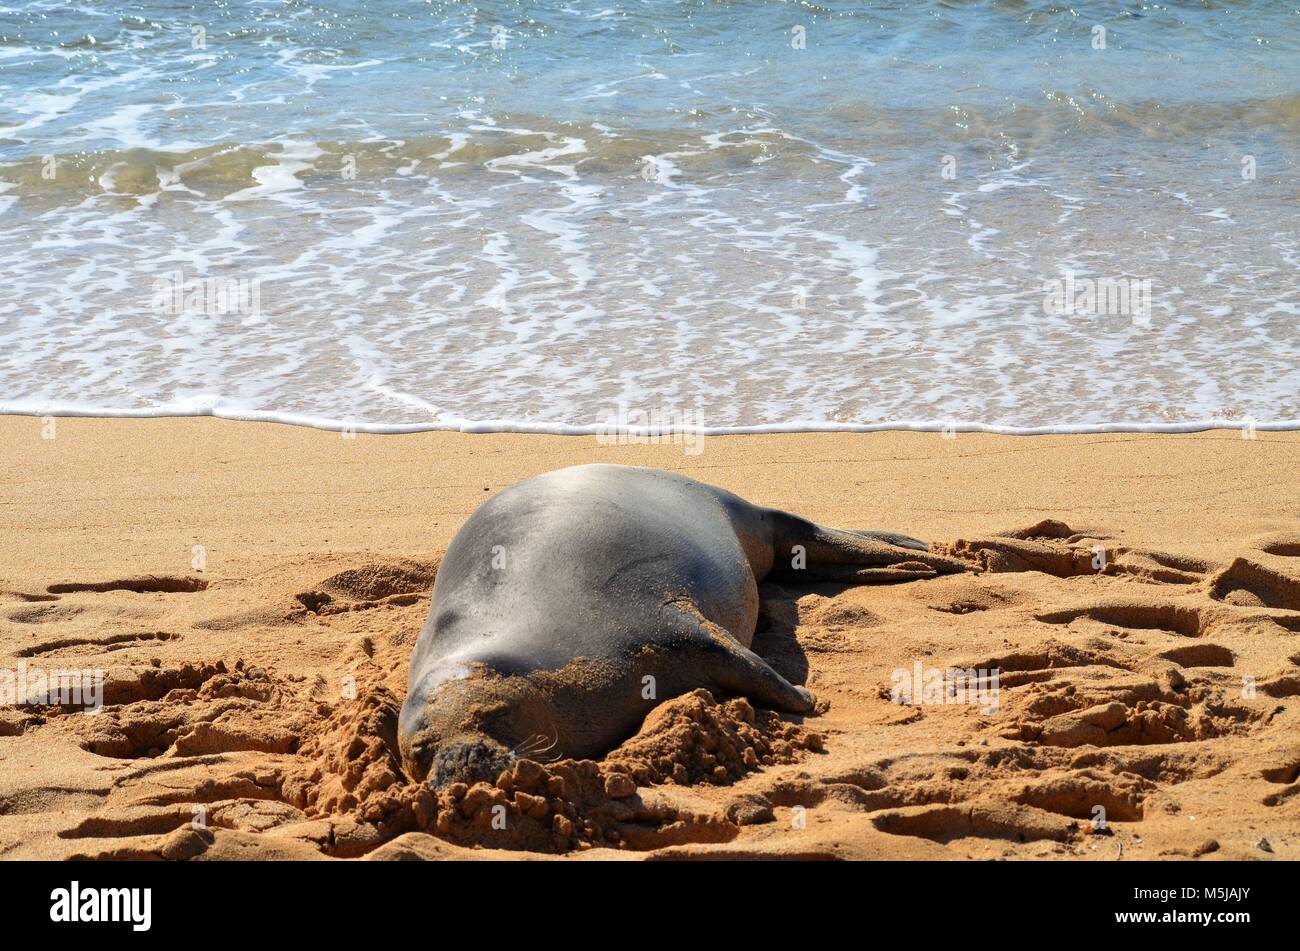 A monk seal has come inland from the ocean, to lay on the sandy Hawaiian beach and rest before heading back out to sea to hunt Stock Photo